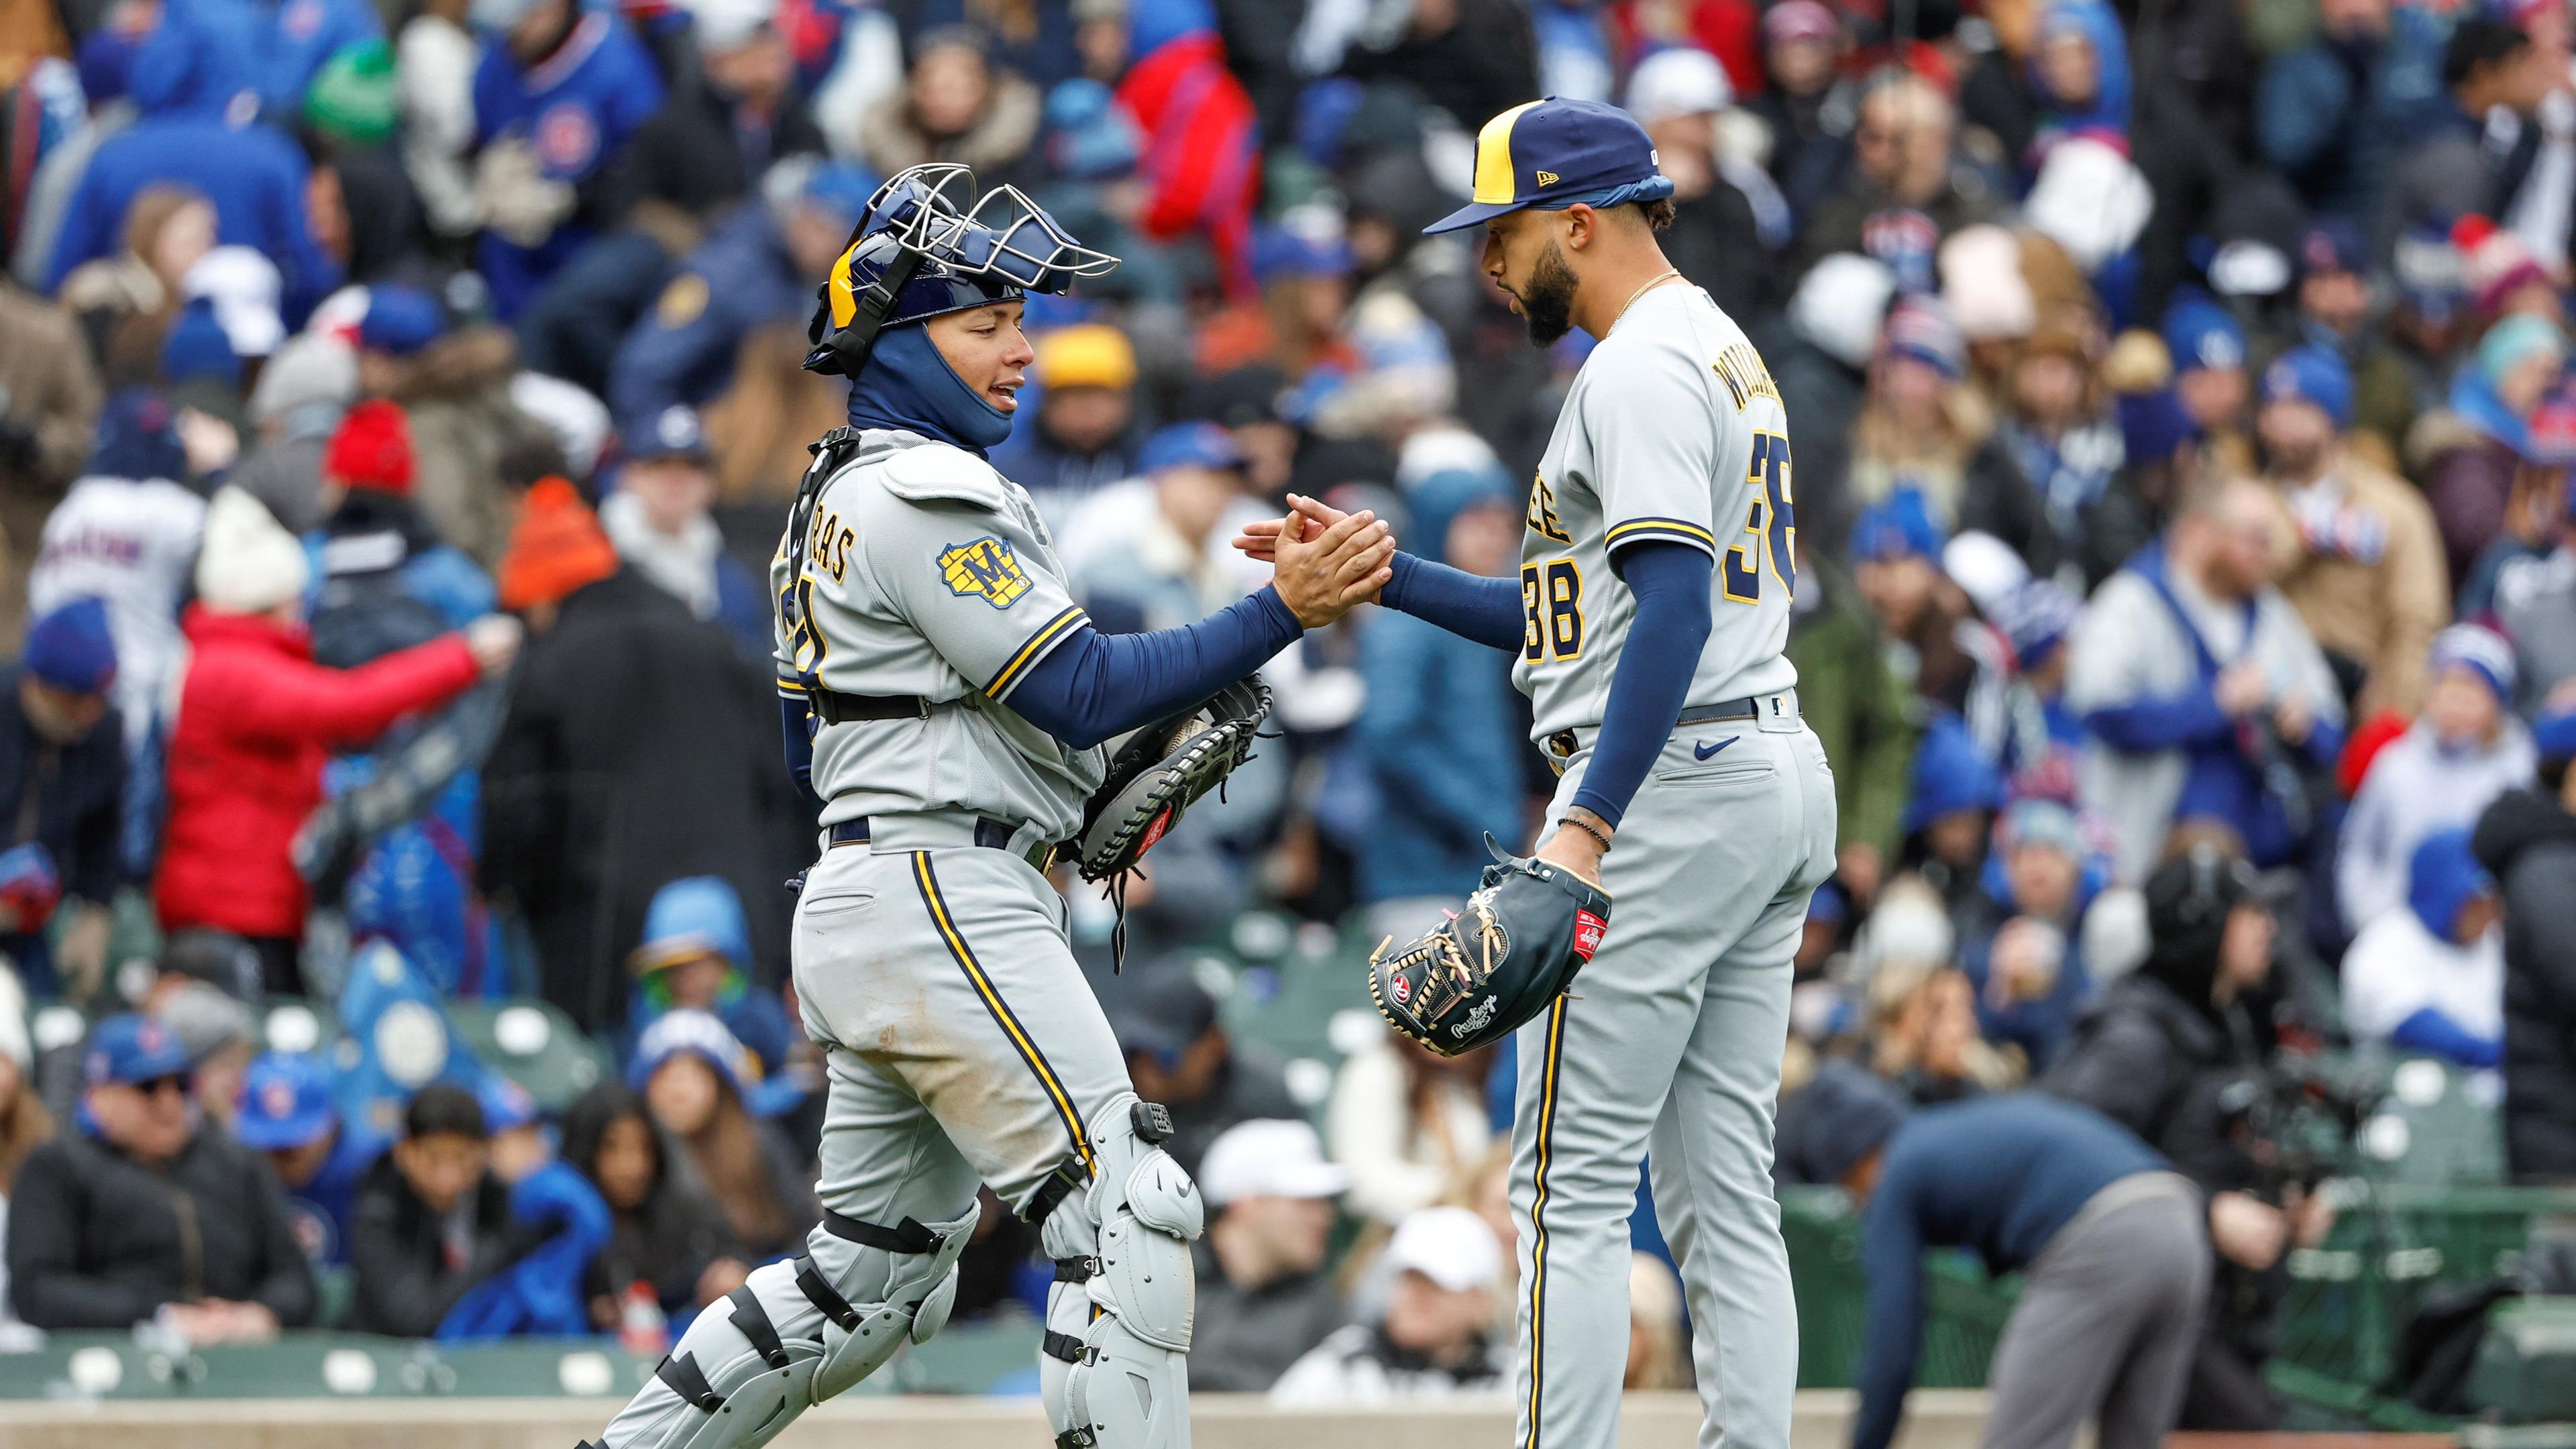 Apr 1, 2023; Chicago, Illinois, USA; Milwaukee Brewers relief pitcher Devin Williams (38) celebrates with catcher William Contreras (24) teams win against the Chicago Cubs at Wrigley Field. Mandatory Credit: Kamil Krzaczynski-USA TODAY Sports / © Kamil Krzaczynski-USA TODAY Sports